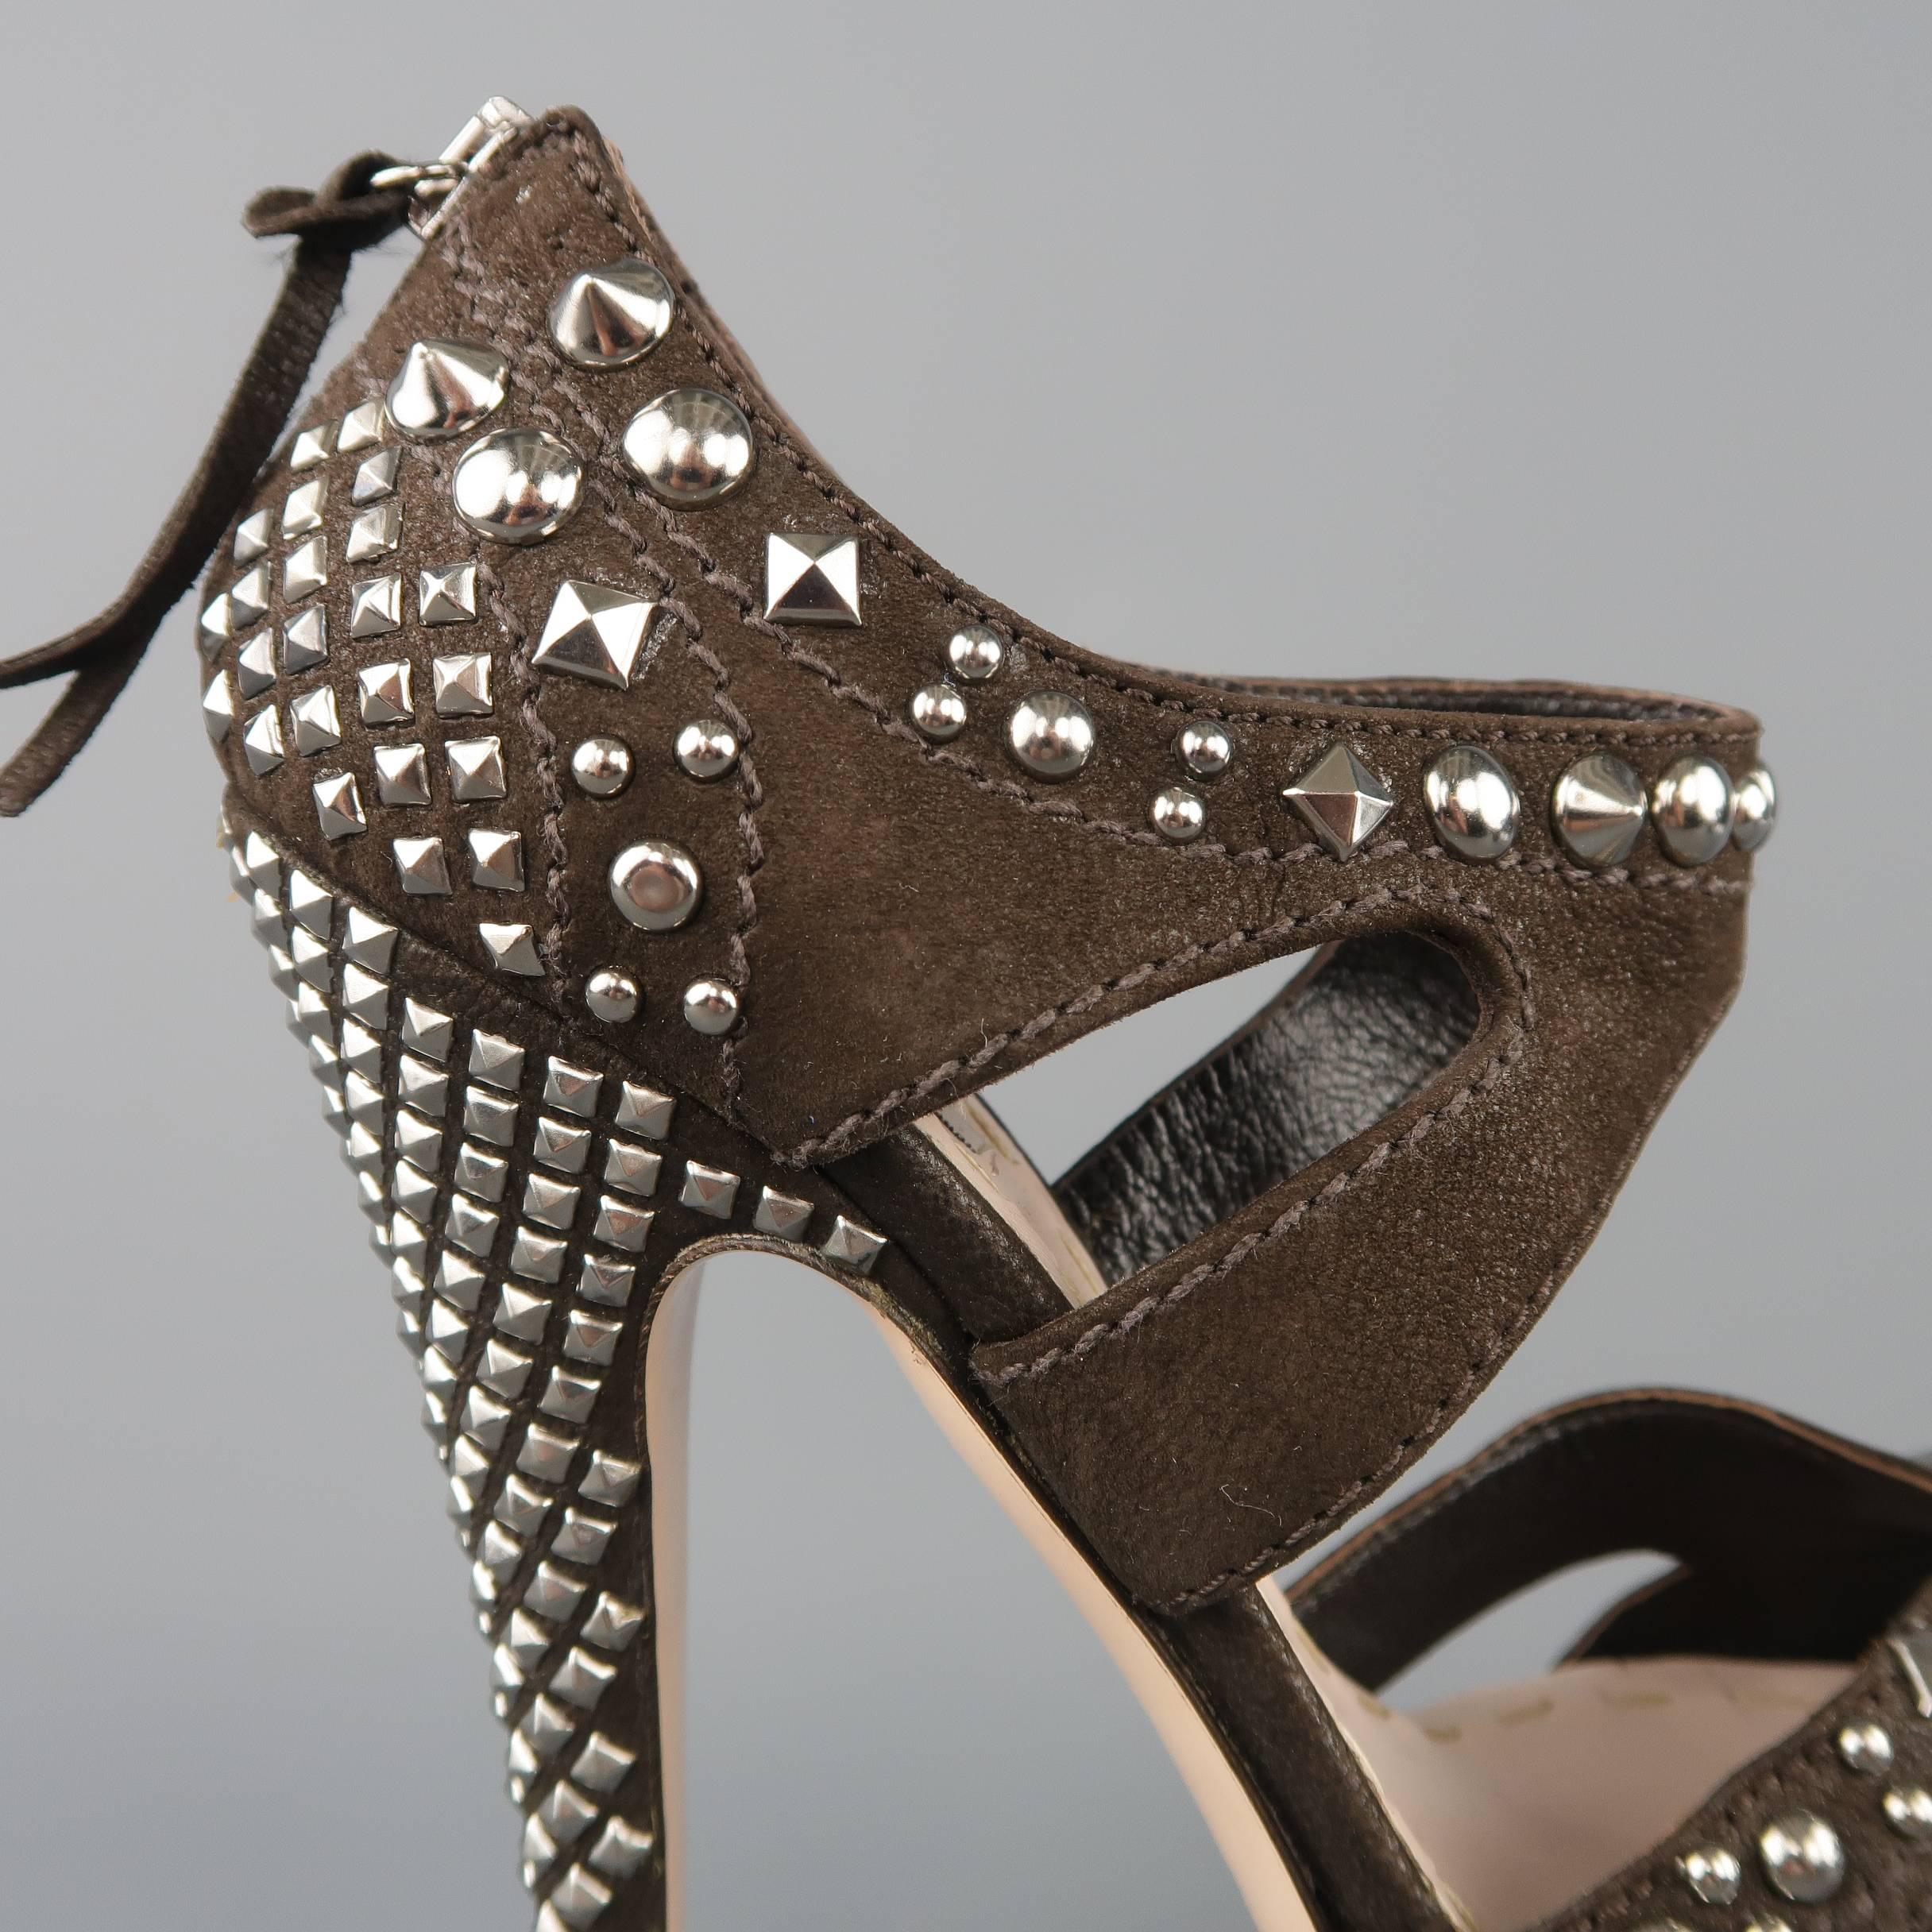 MIU MIU pumps come in chocolate brown suede covered in various silver tone studs with a thick ankle strap and covered heel and platform.  Made in Italy.
 
Excellent Pre-Owned Condition.
Marked: IT 35.5
 
Measurements:
 
Heel: 5.5 in.
Platform: 1.45